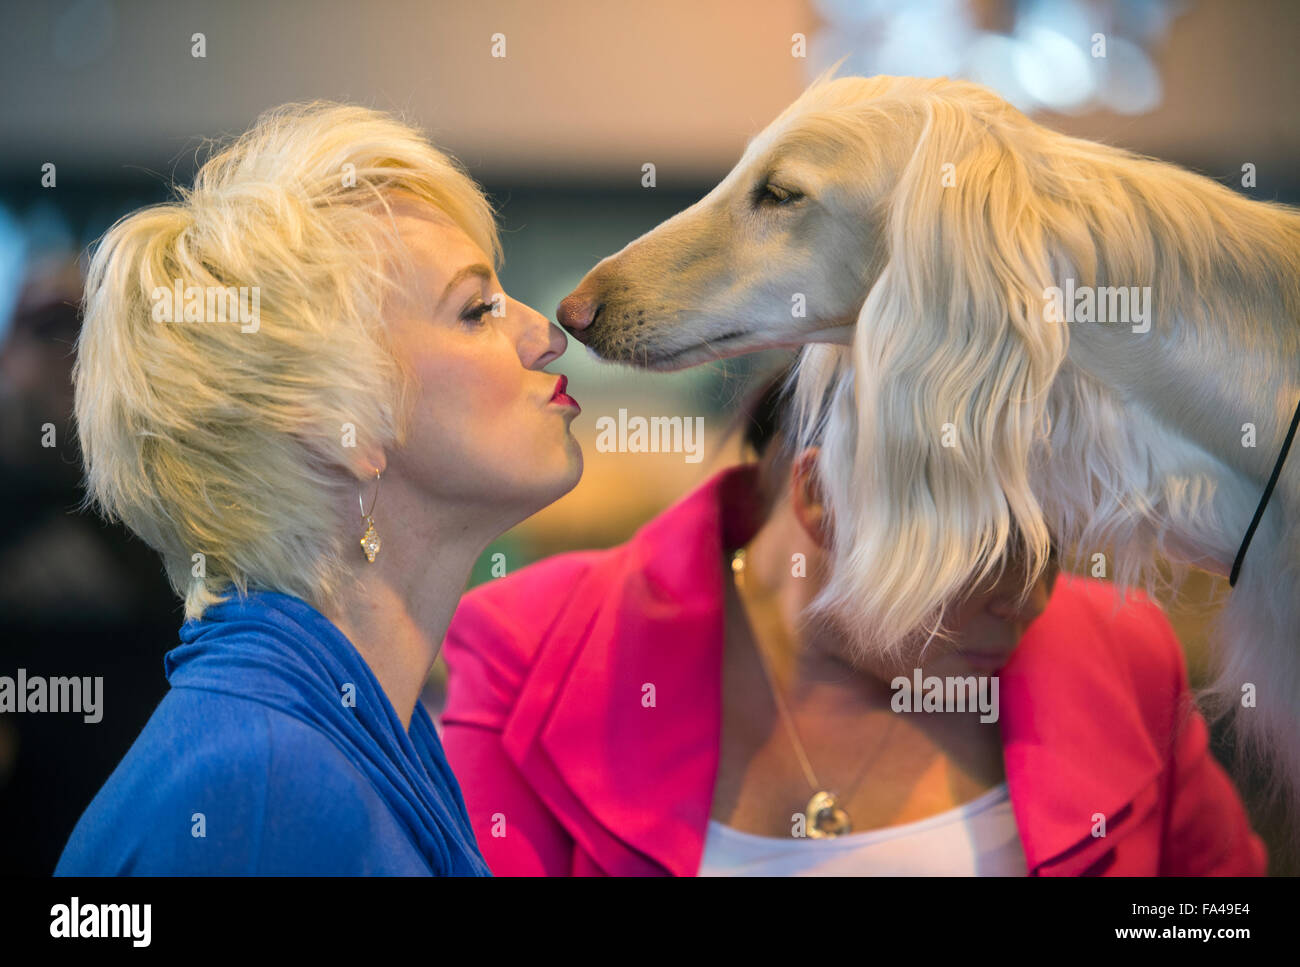 Crufts dog show at the NEC, Birmingham - A dog lover meets an Afghan Hound with the pet name ‘Marcus’ before showing Stock Photo